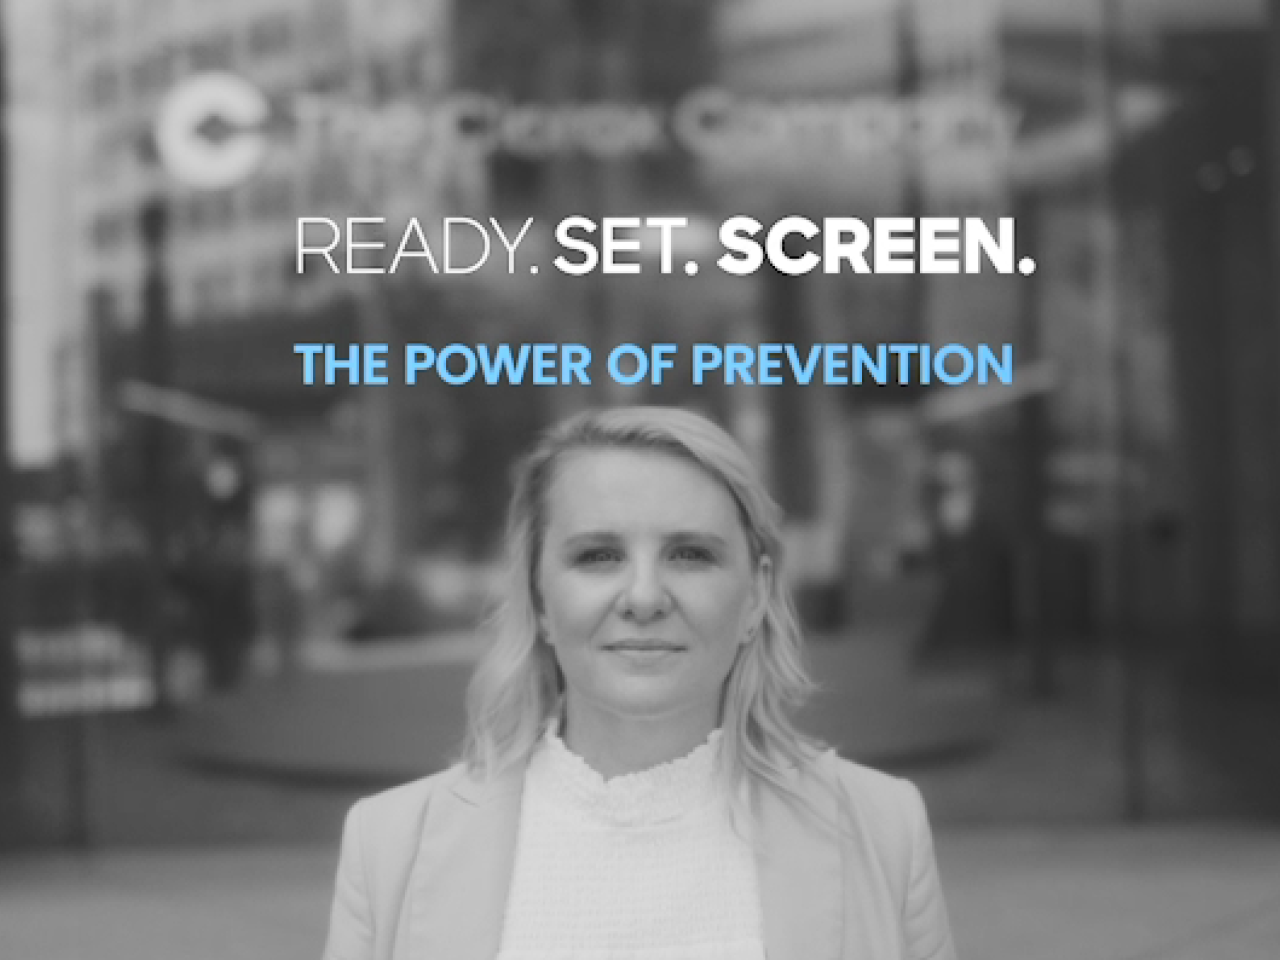 Natalie Hovany. "Ready. Set. Screen. The Power of Prevention" above her.